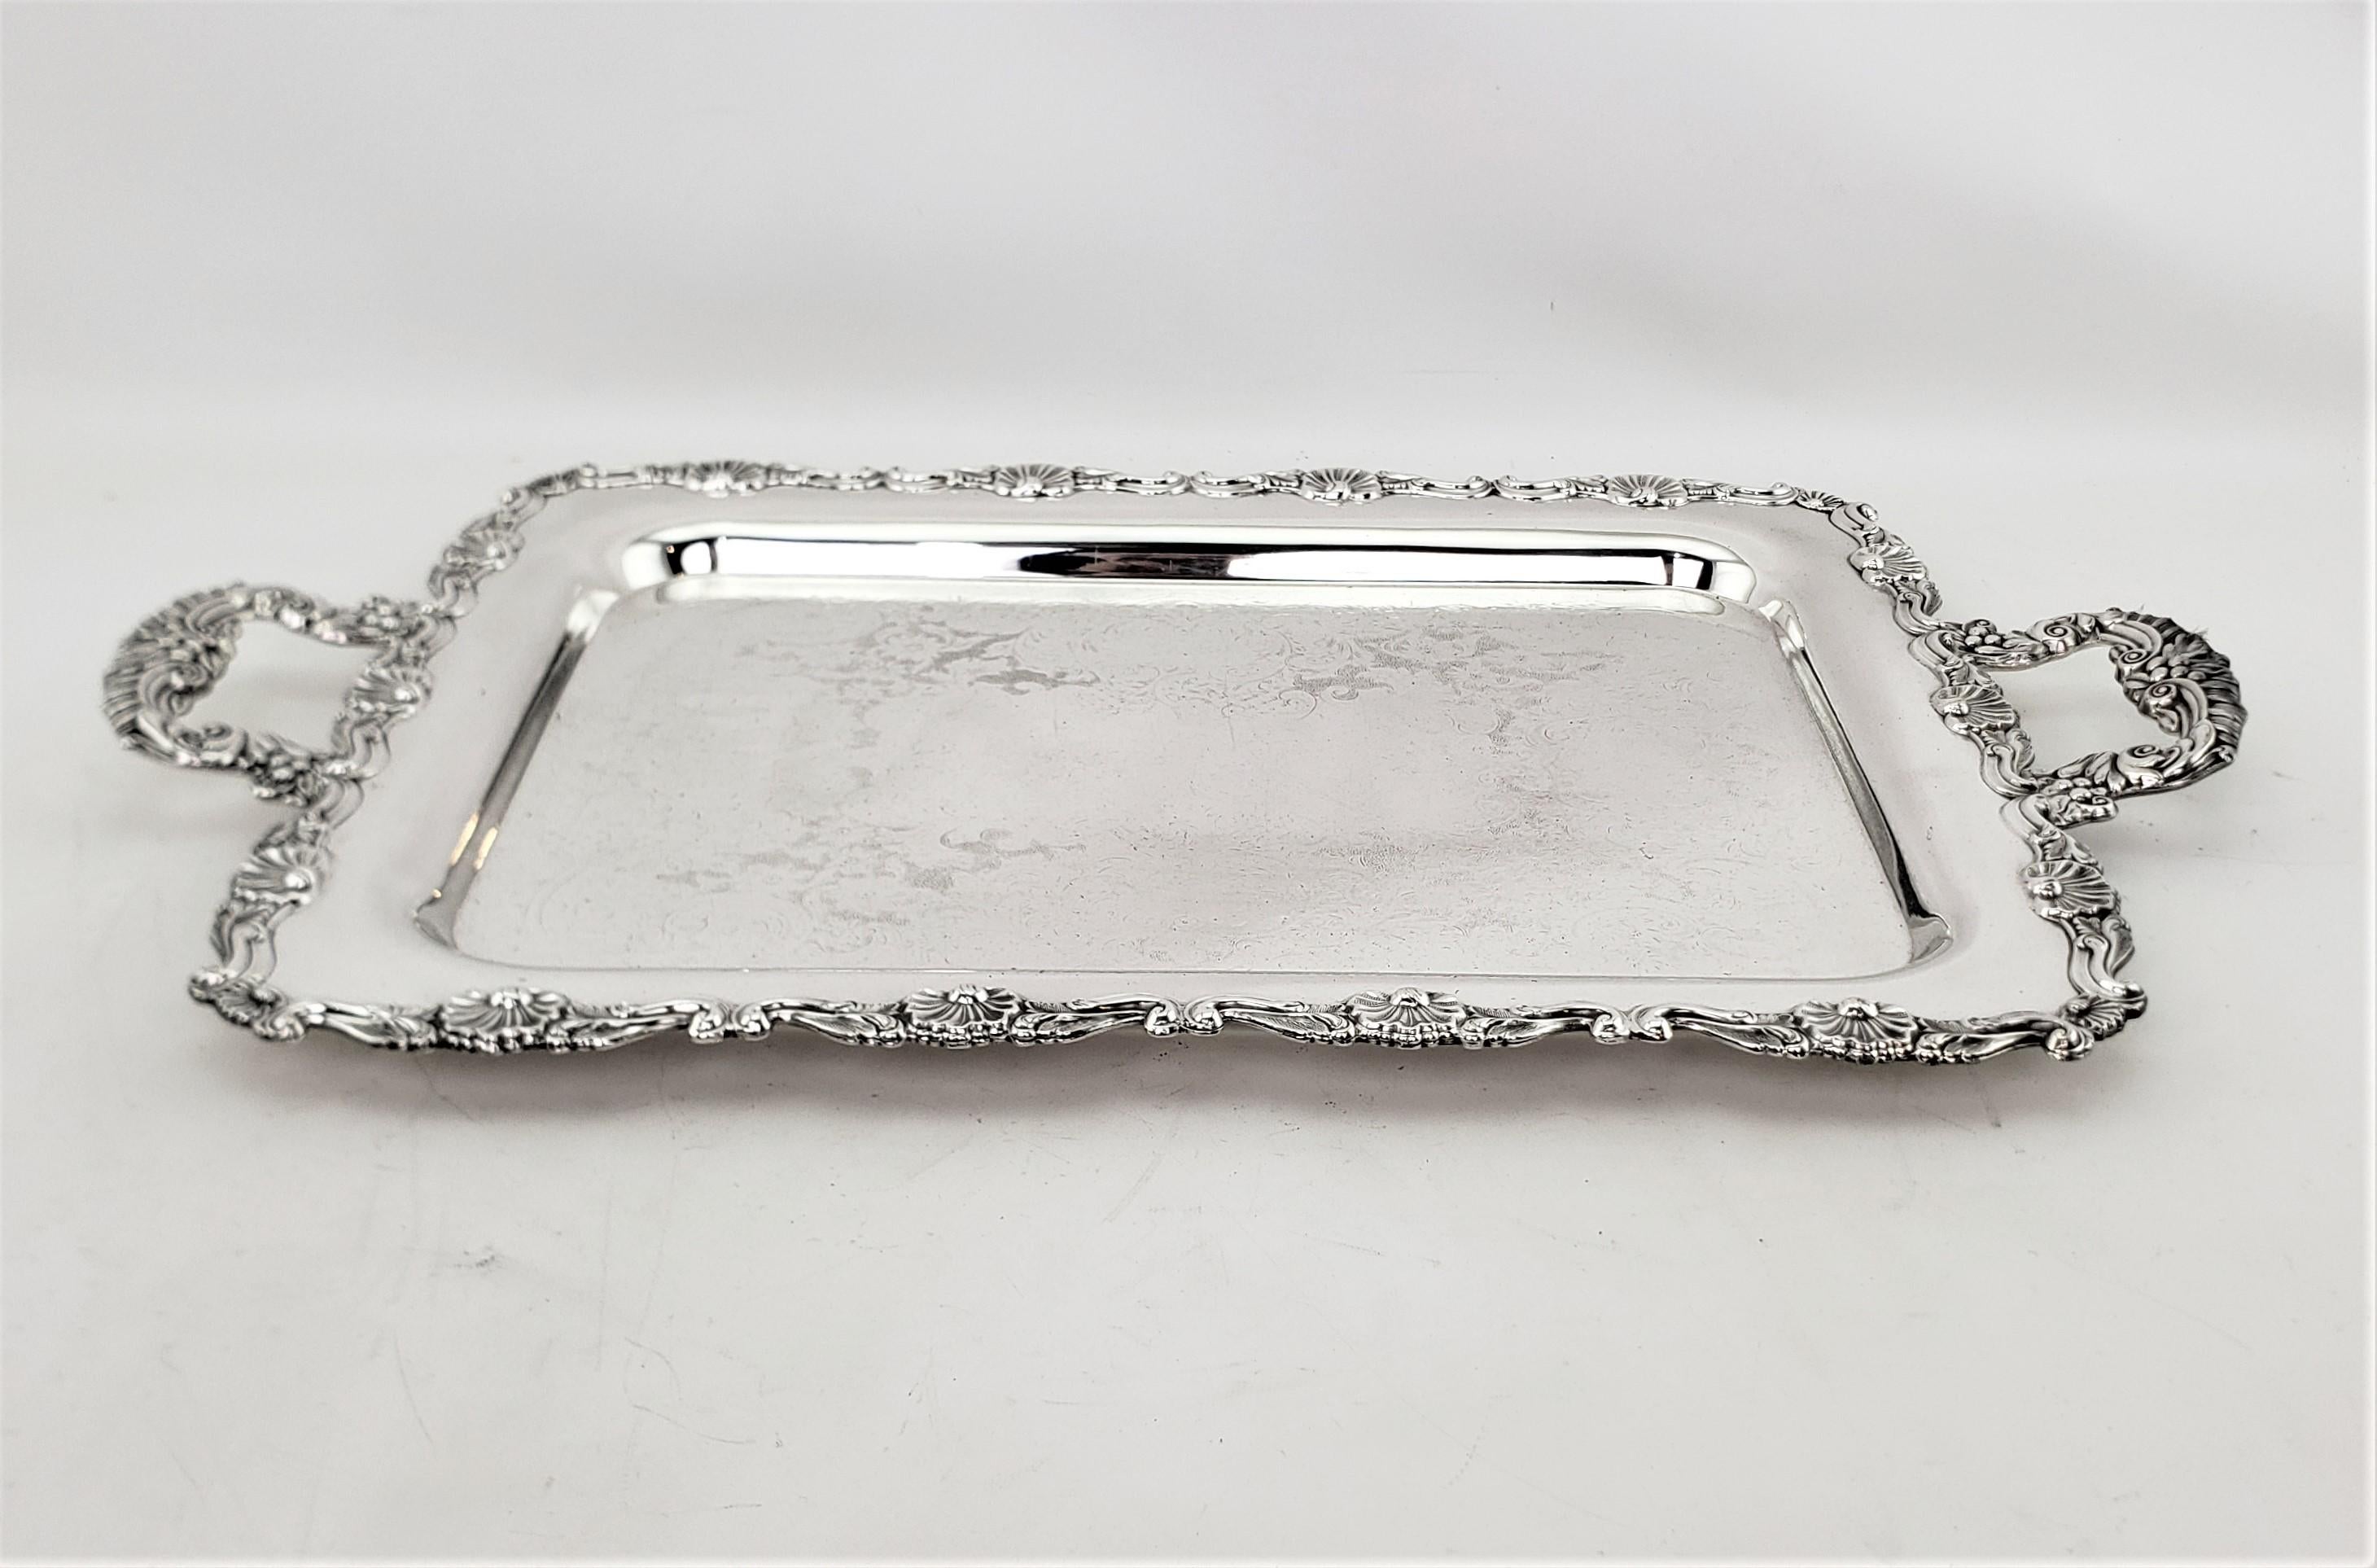 Victorian Antique Rectangular Silver Plated Serving Tray with Stylized Floral Decoration For Sale